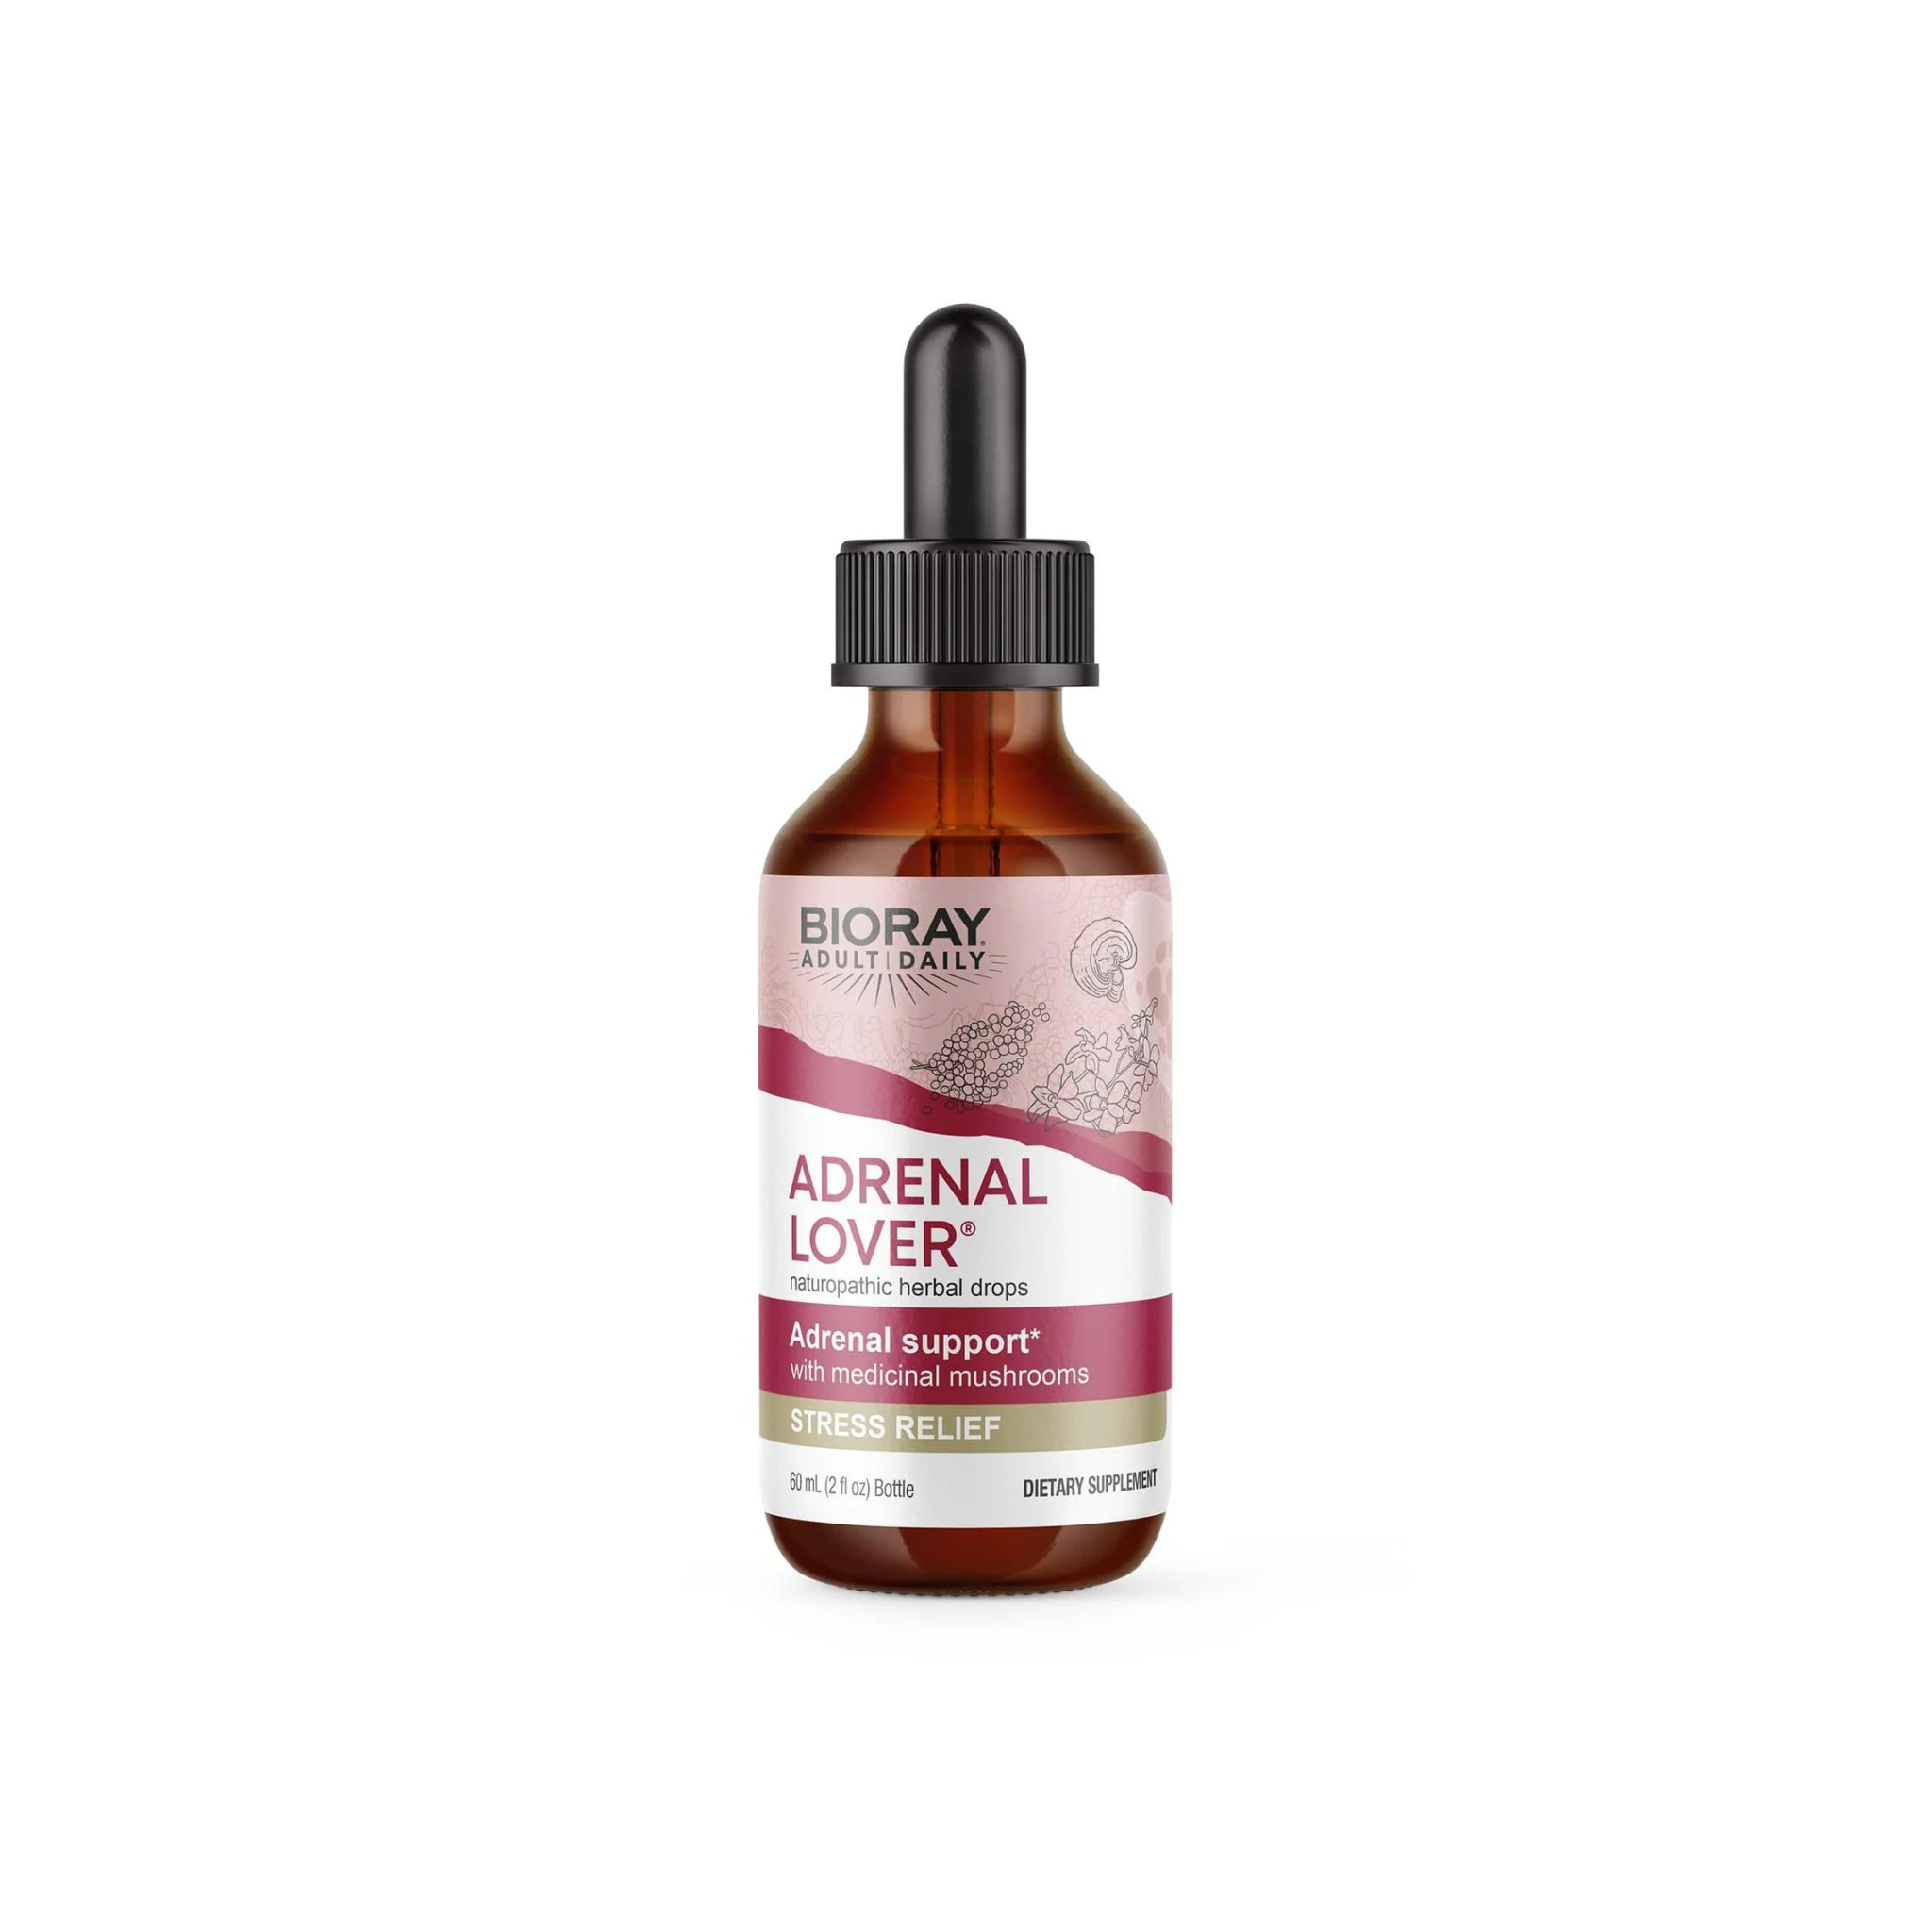 Adrenal Lover, Adrenal Support with Medical Mushrooms, 2 fl oz (60 ml)